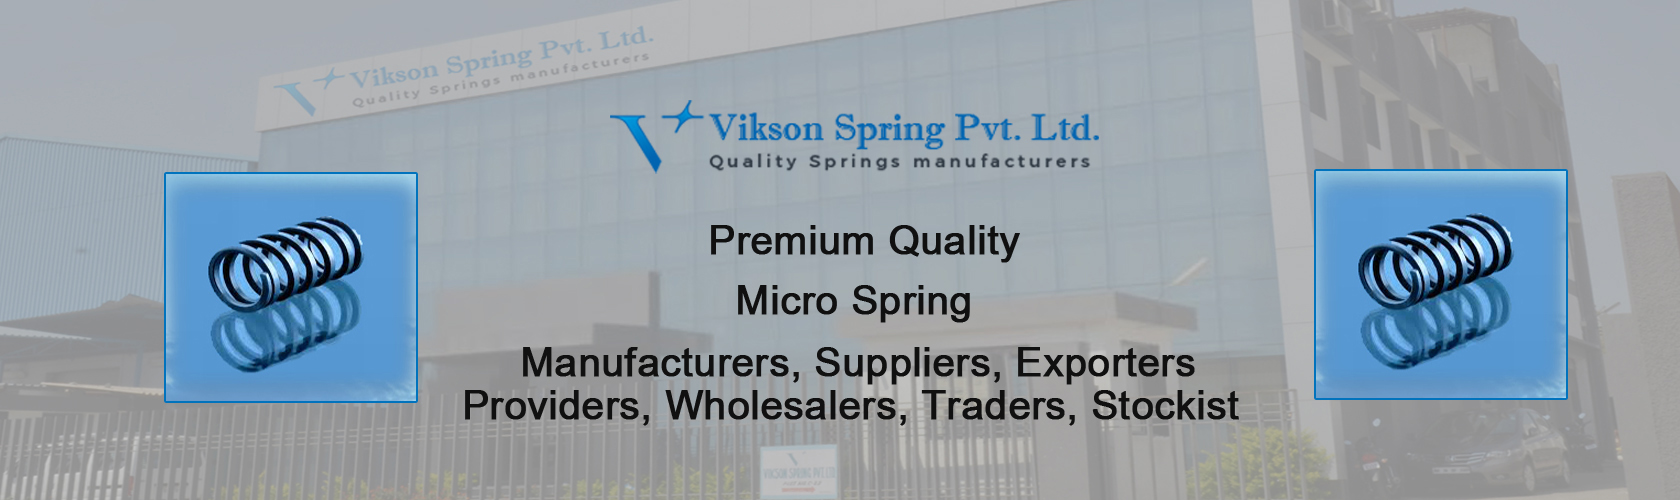 Micro Spring Manufacturers